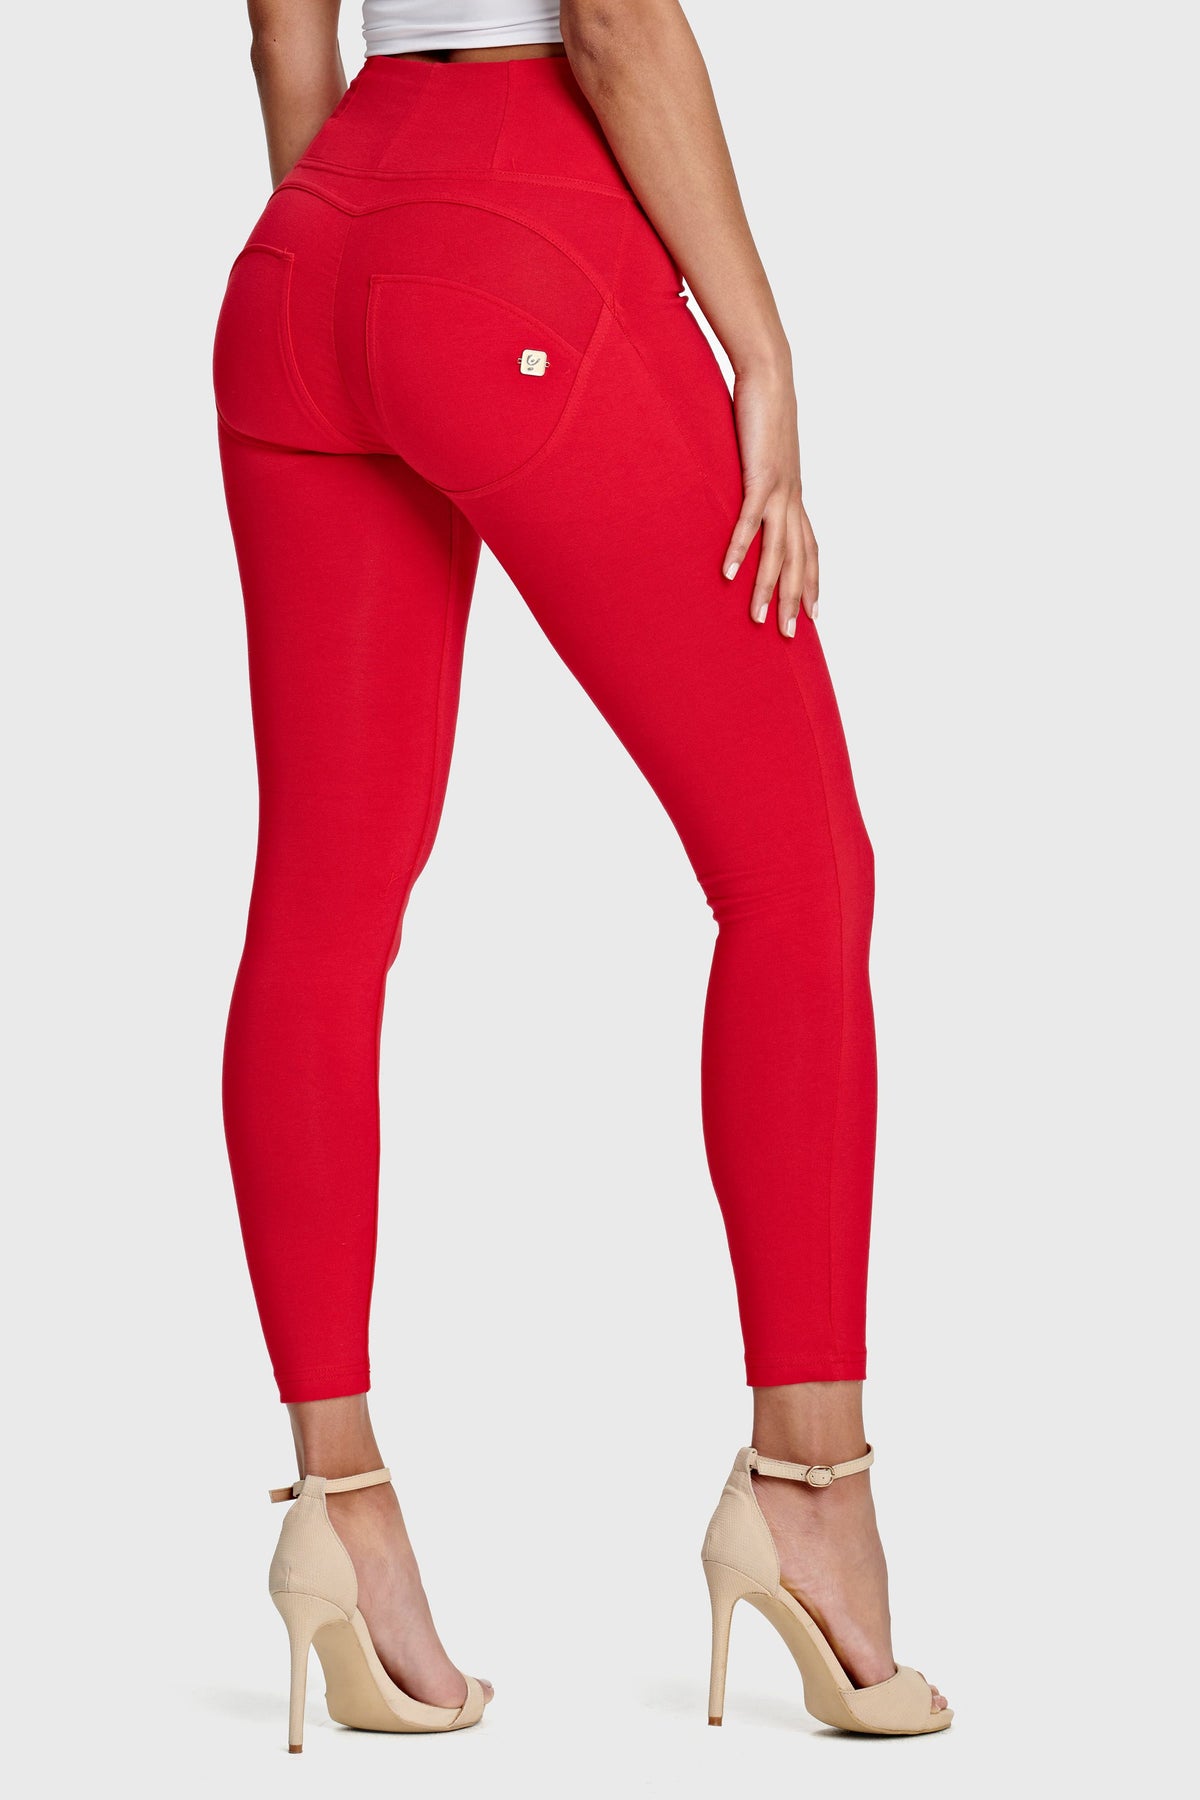 Ankle Length Red High Rise Organic